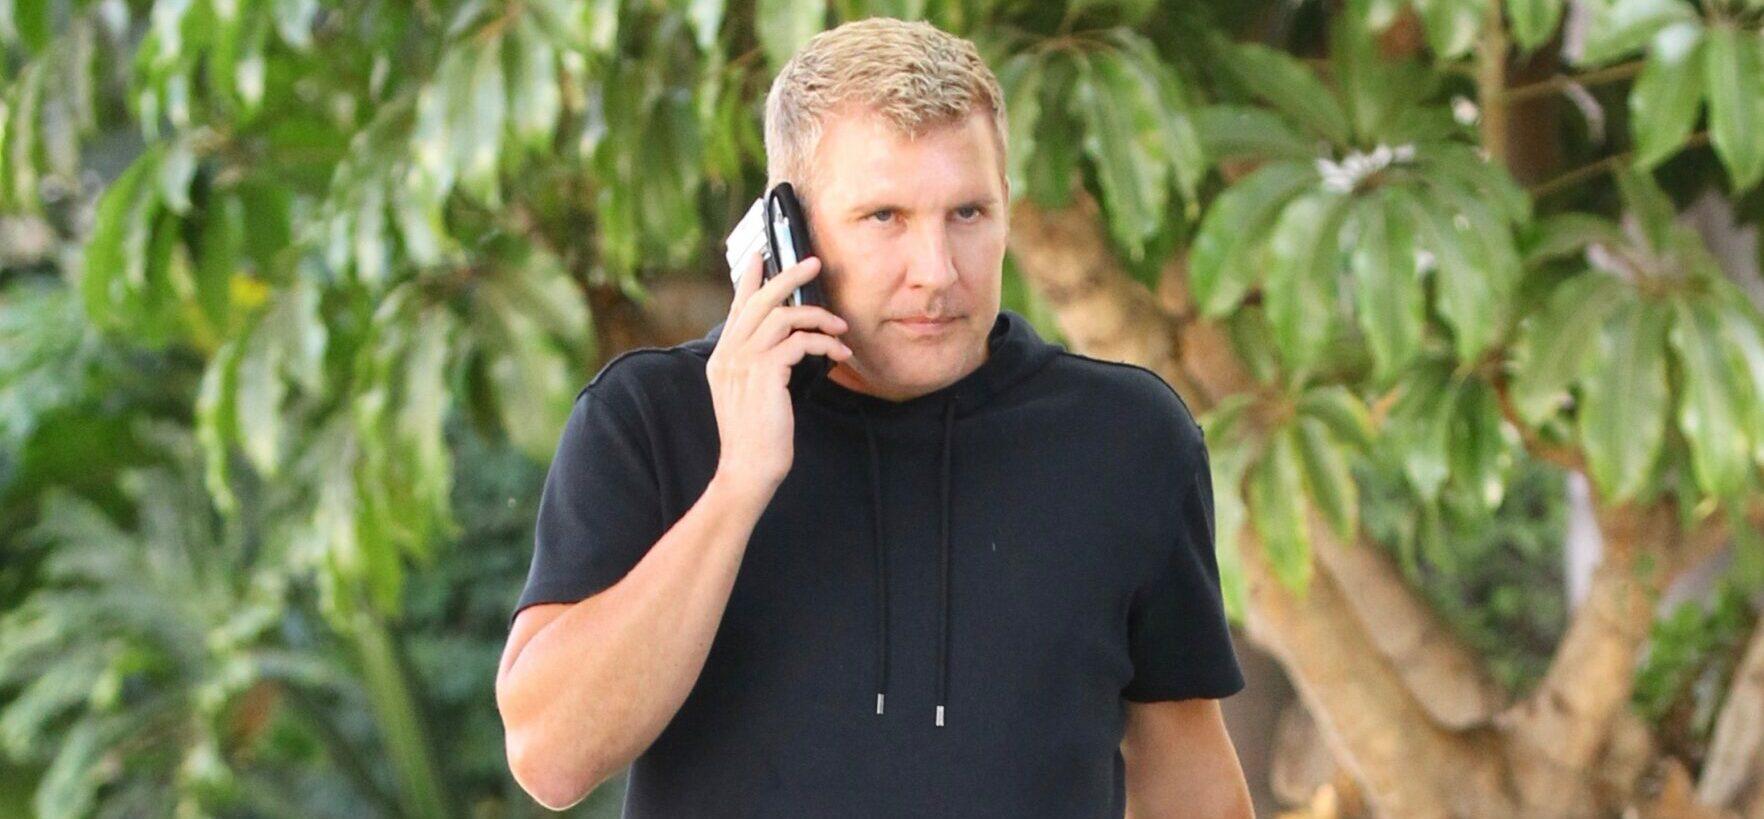 Chrisley Knows Best star Todd Chrisley gets a parking ticket in LA